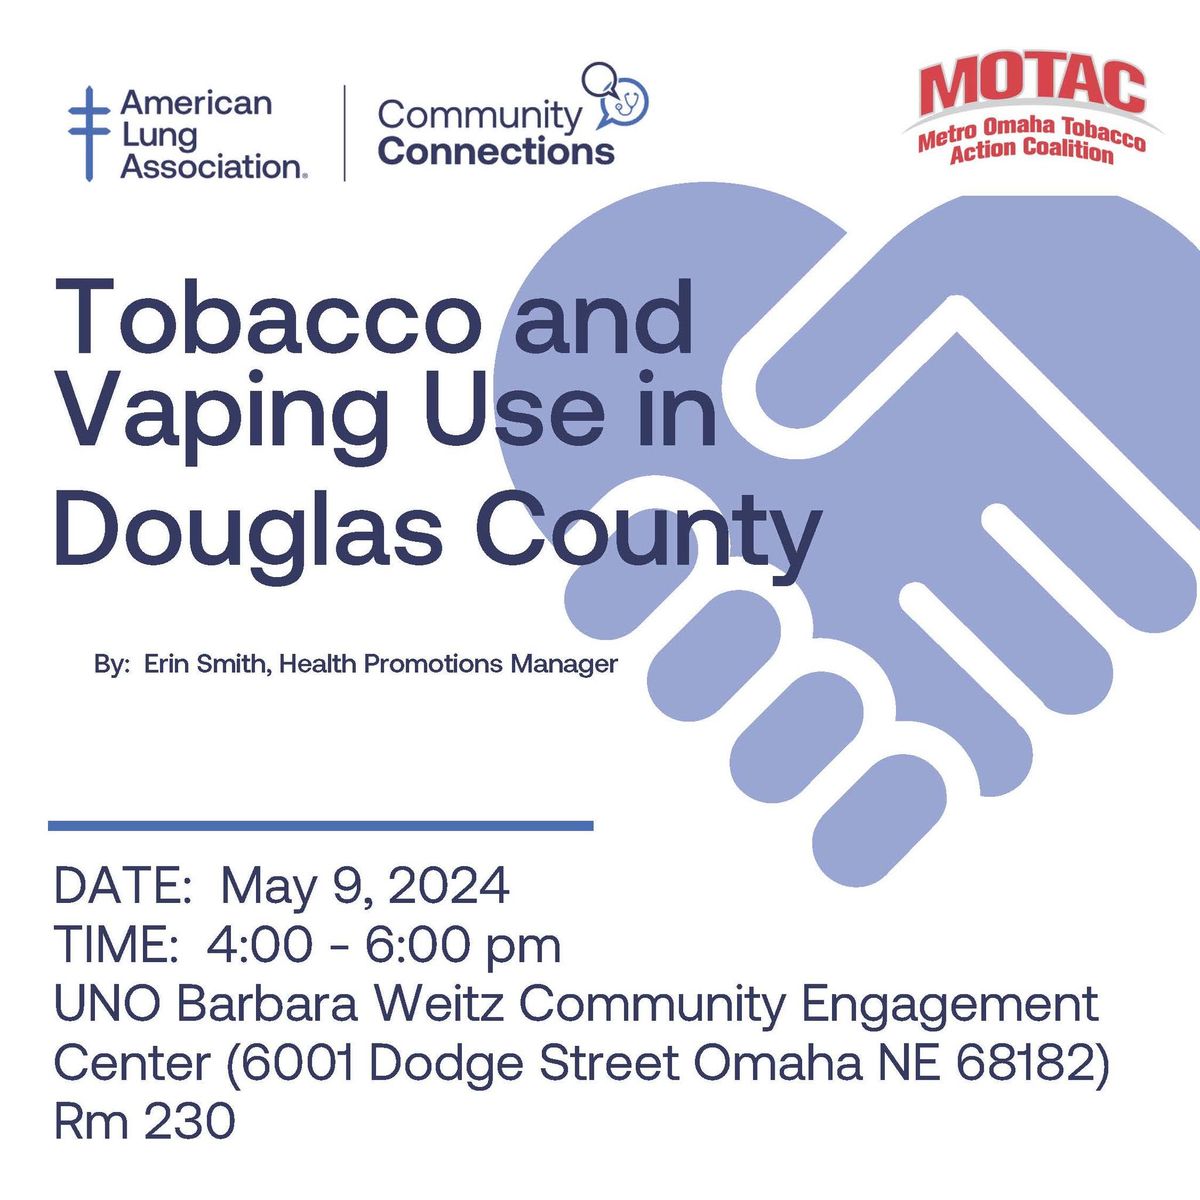 Tobacco and Vaping Use in Douglas County